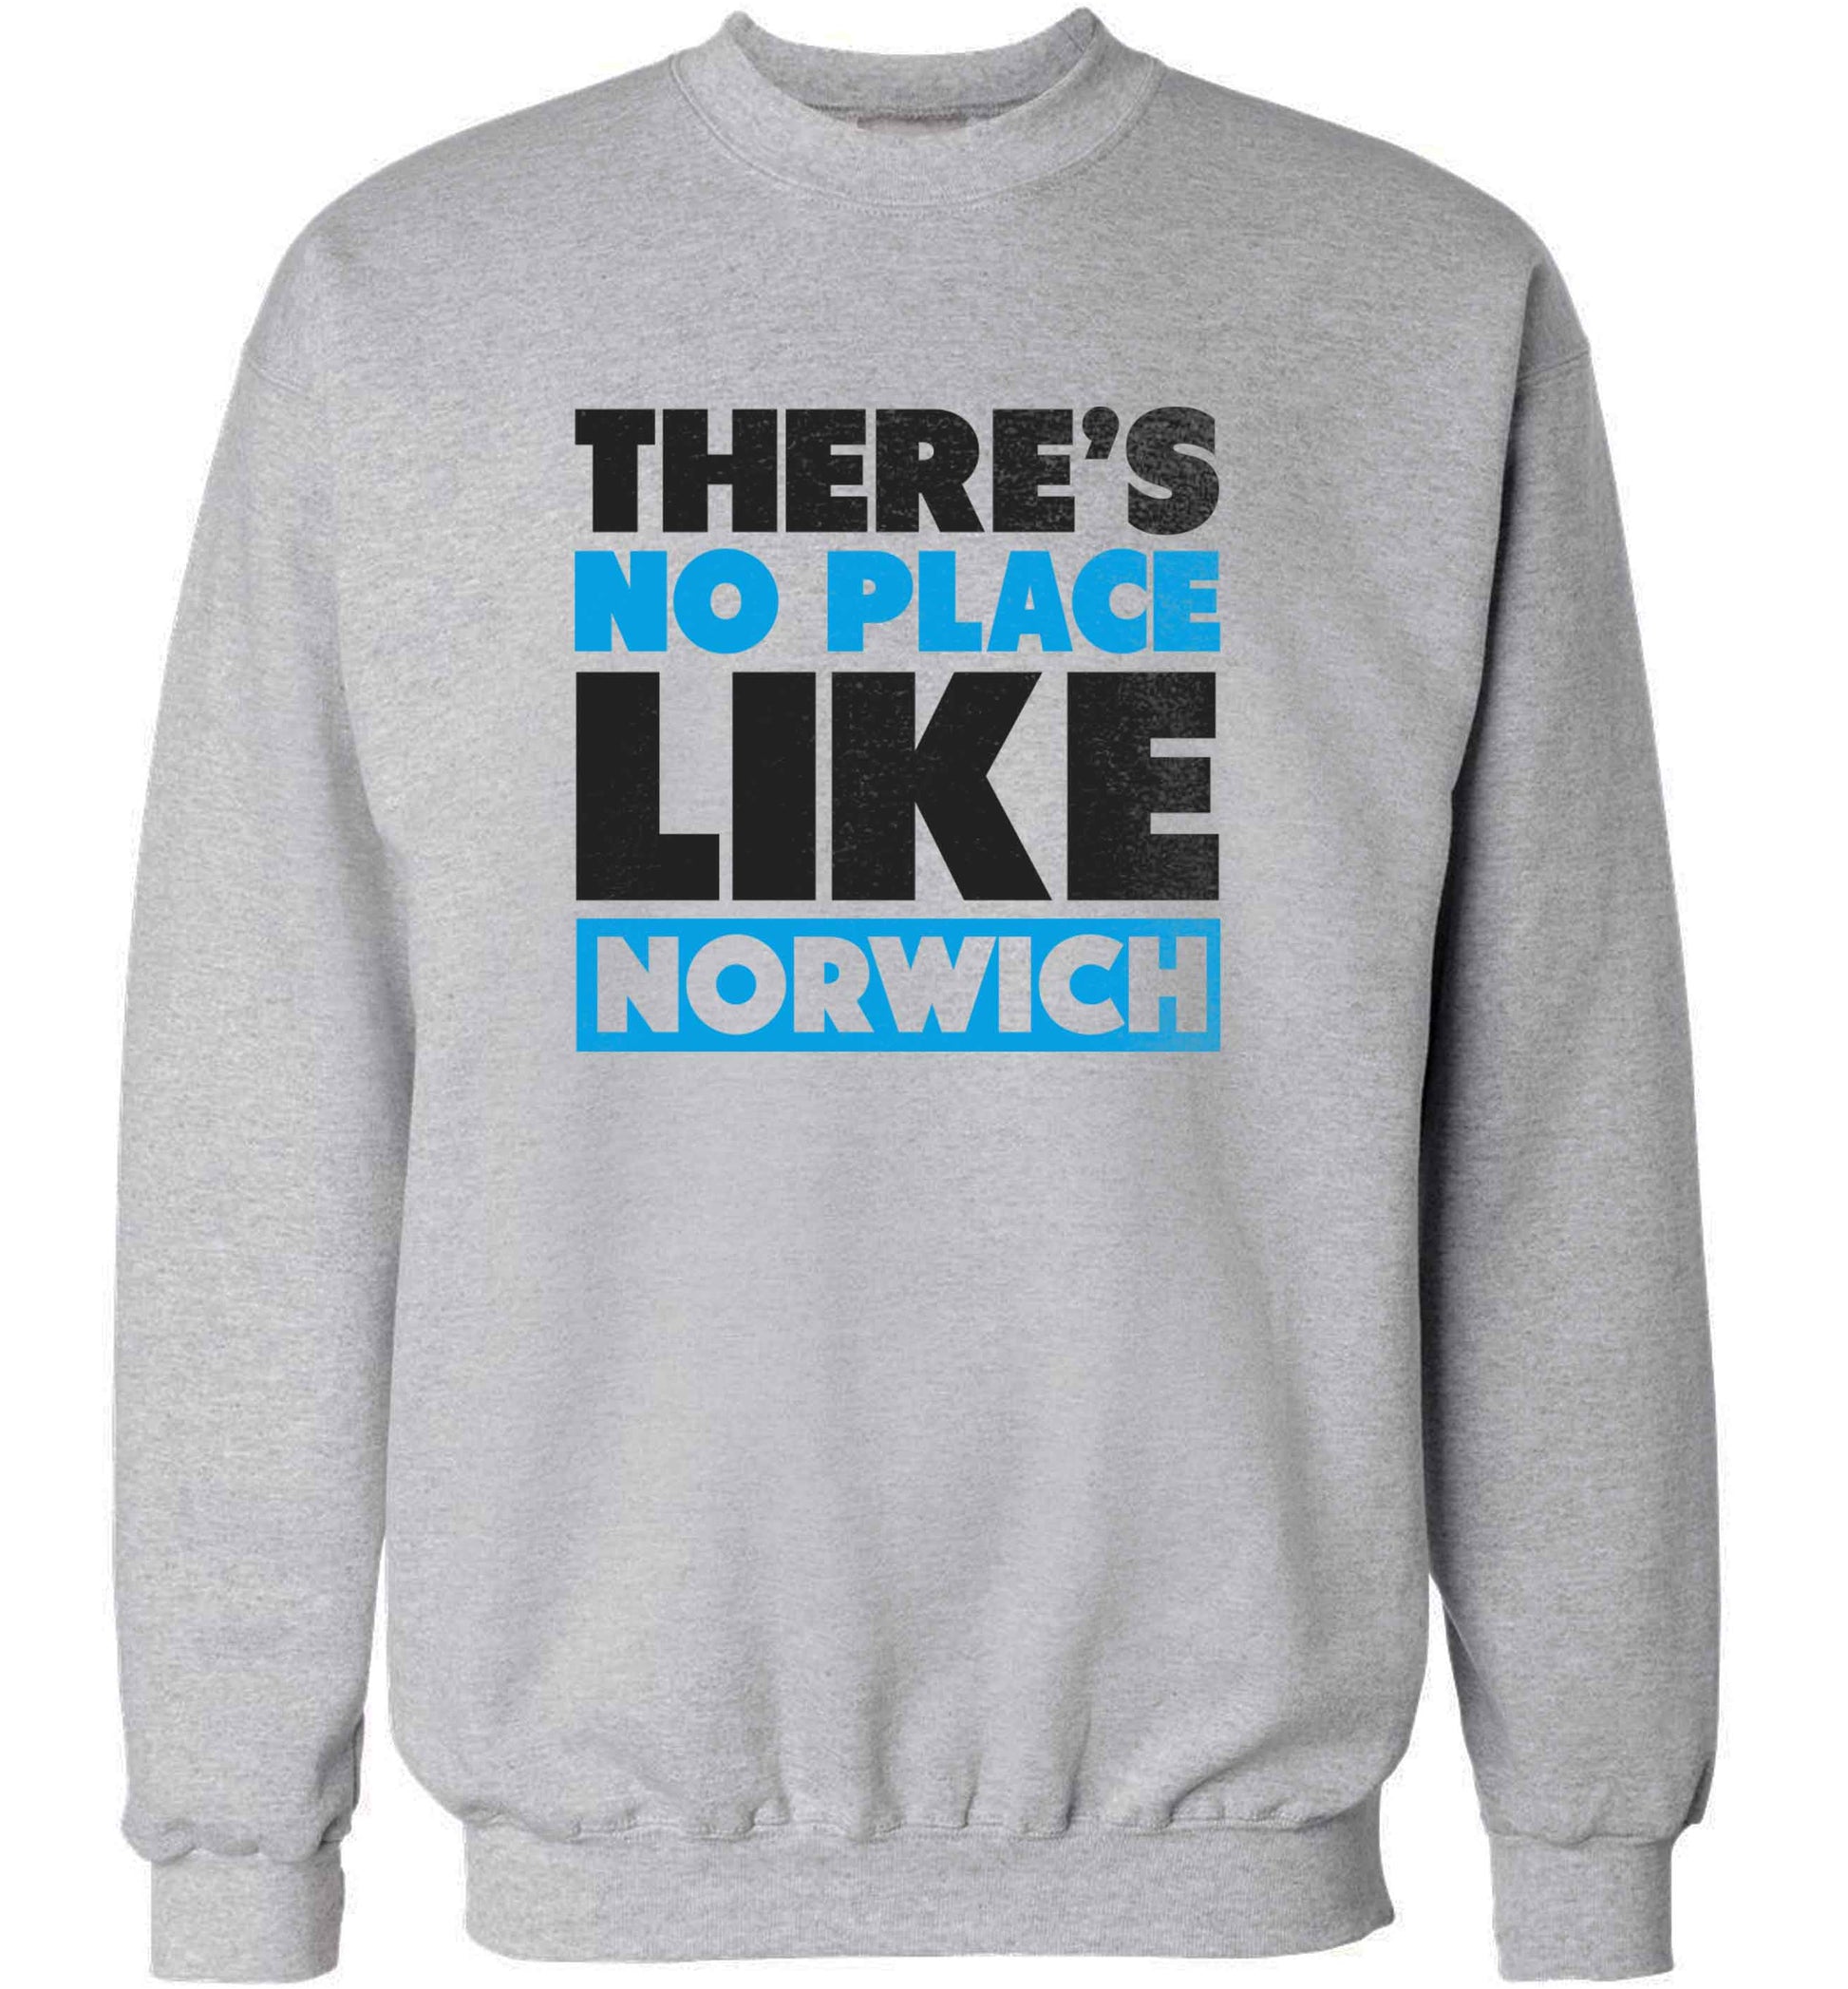 There's no place like Norwich adult's unisex grey sweater 2XL